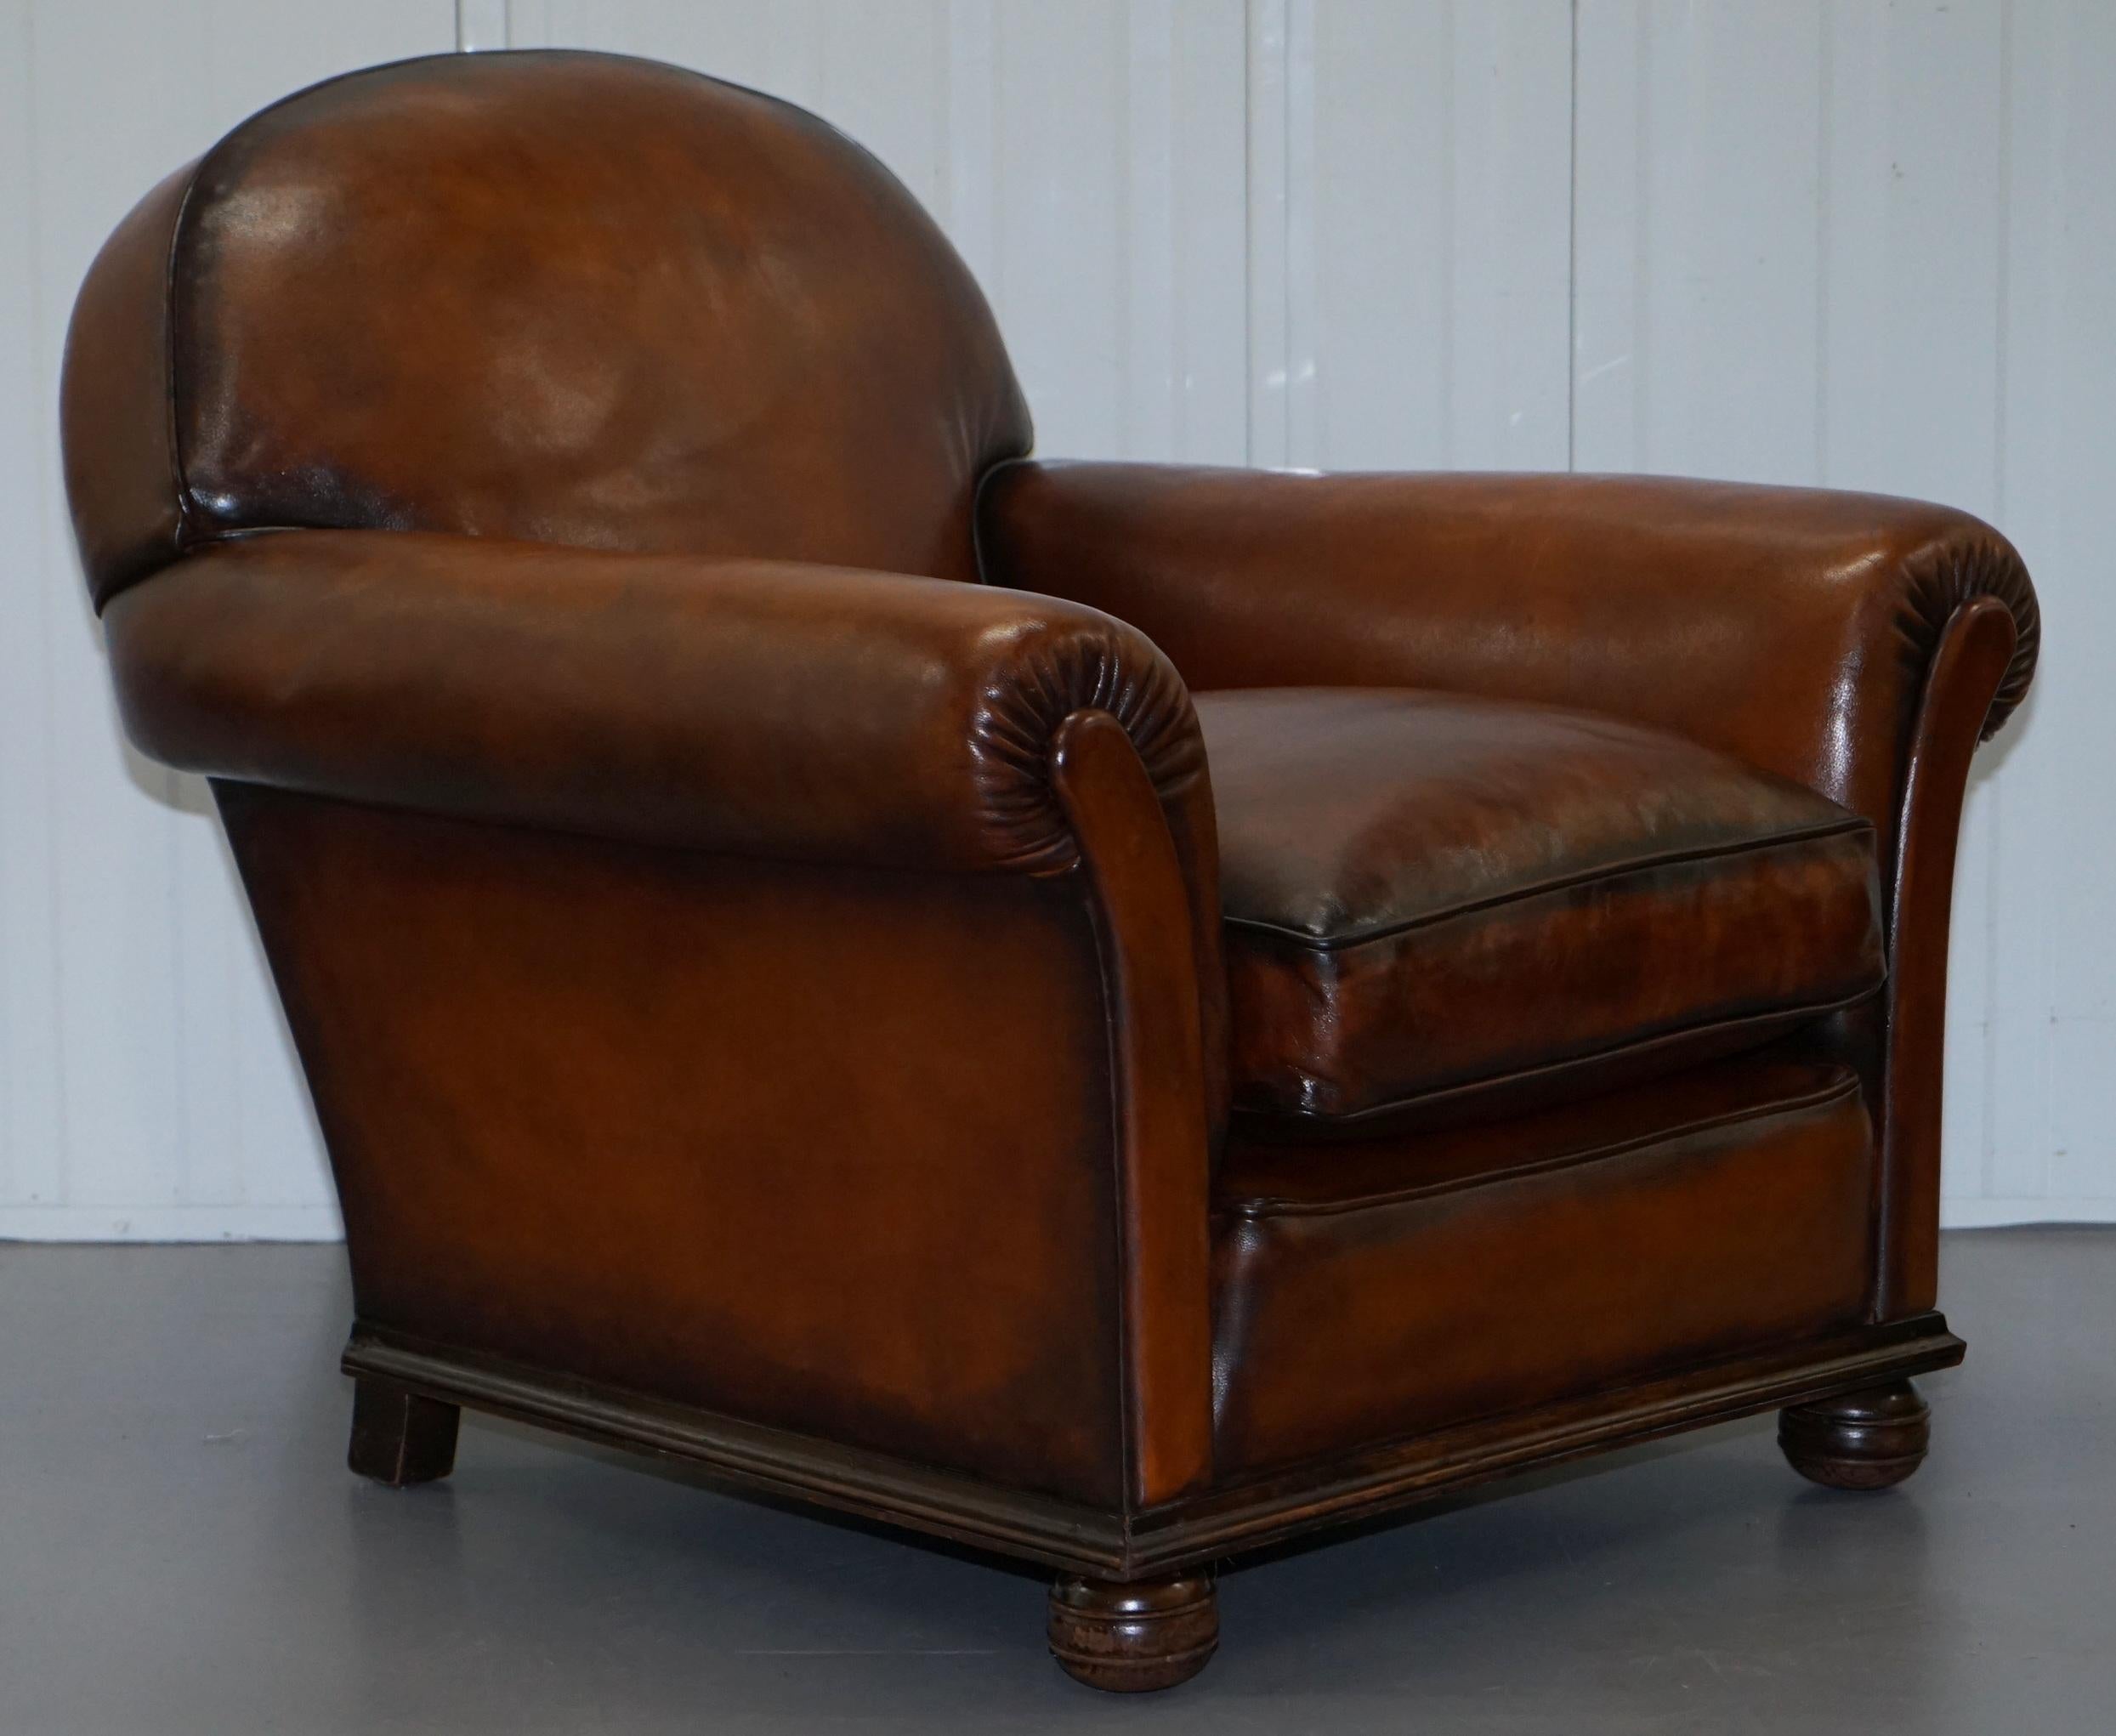 We are delighted to offer for sale this stunning pair of fully restored Whiskey aged brown leather Victorian club armchairs

A very good looking and nicely refurbished pair, these are original Victorian pieces, they have new feather filled seat